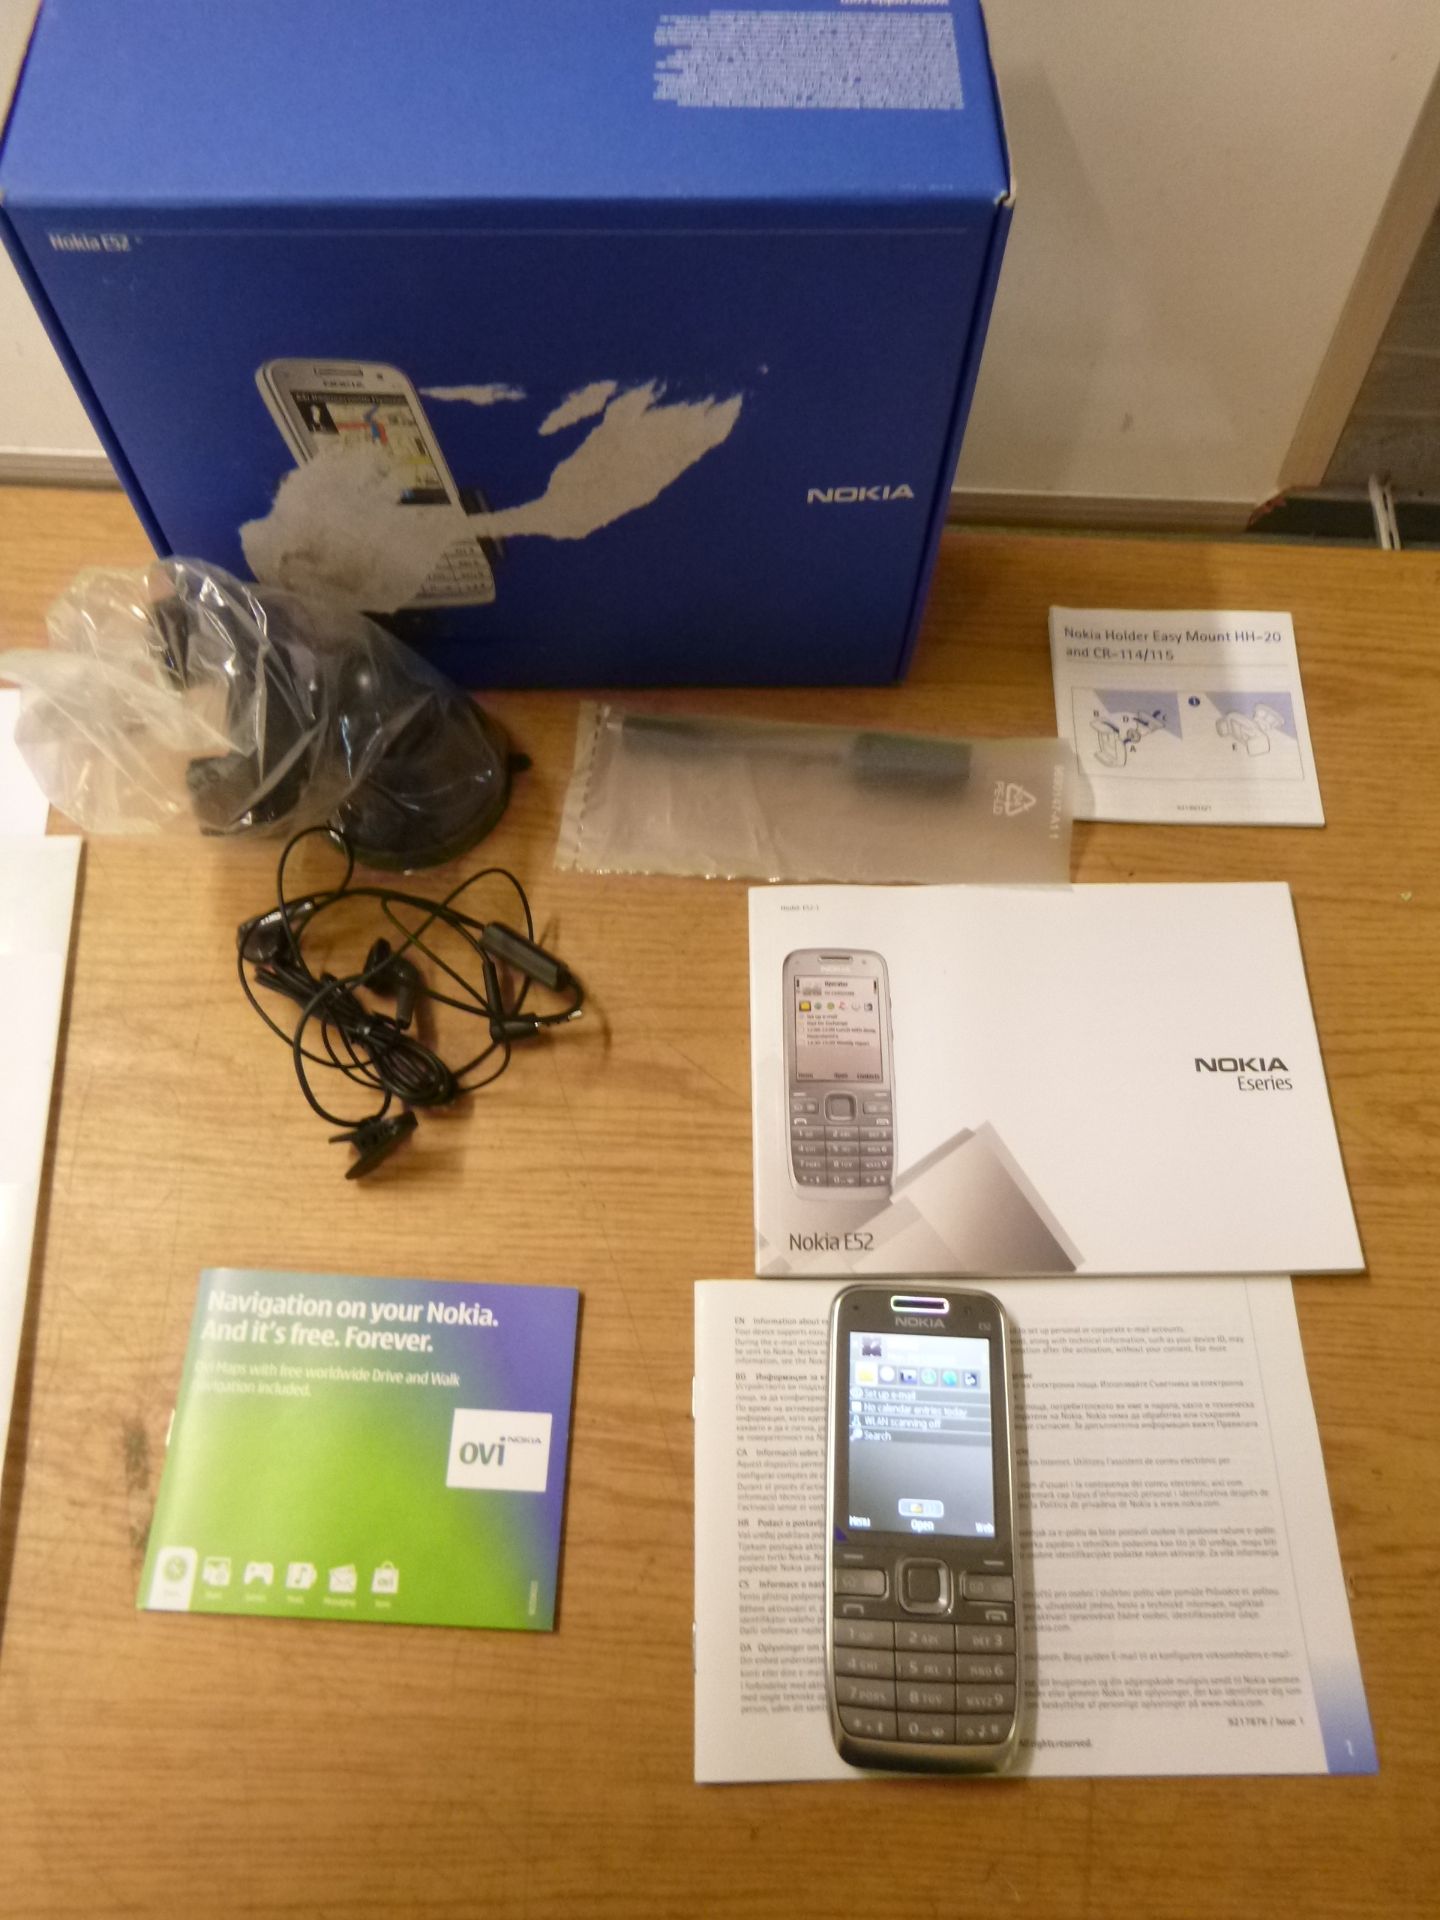 NOKIA E52-1 Metal VERSION MANUFACTURED IN FINLAND. BOXED WITH CHARGER, EARPHONES, CABLES,